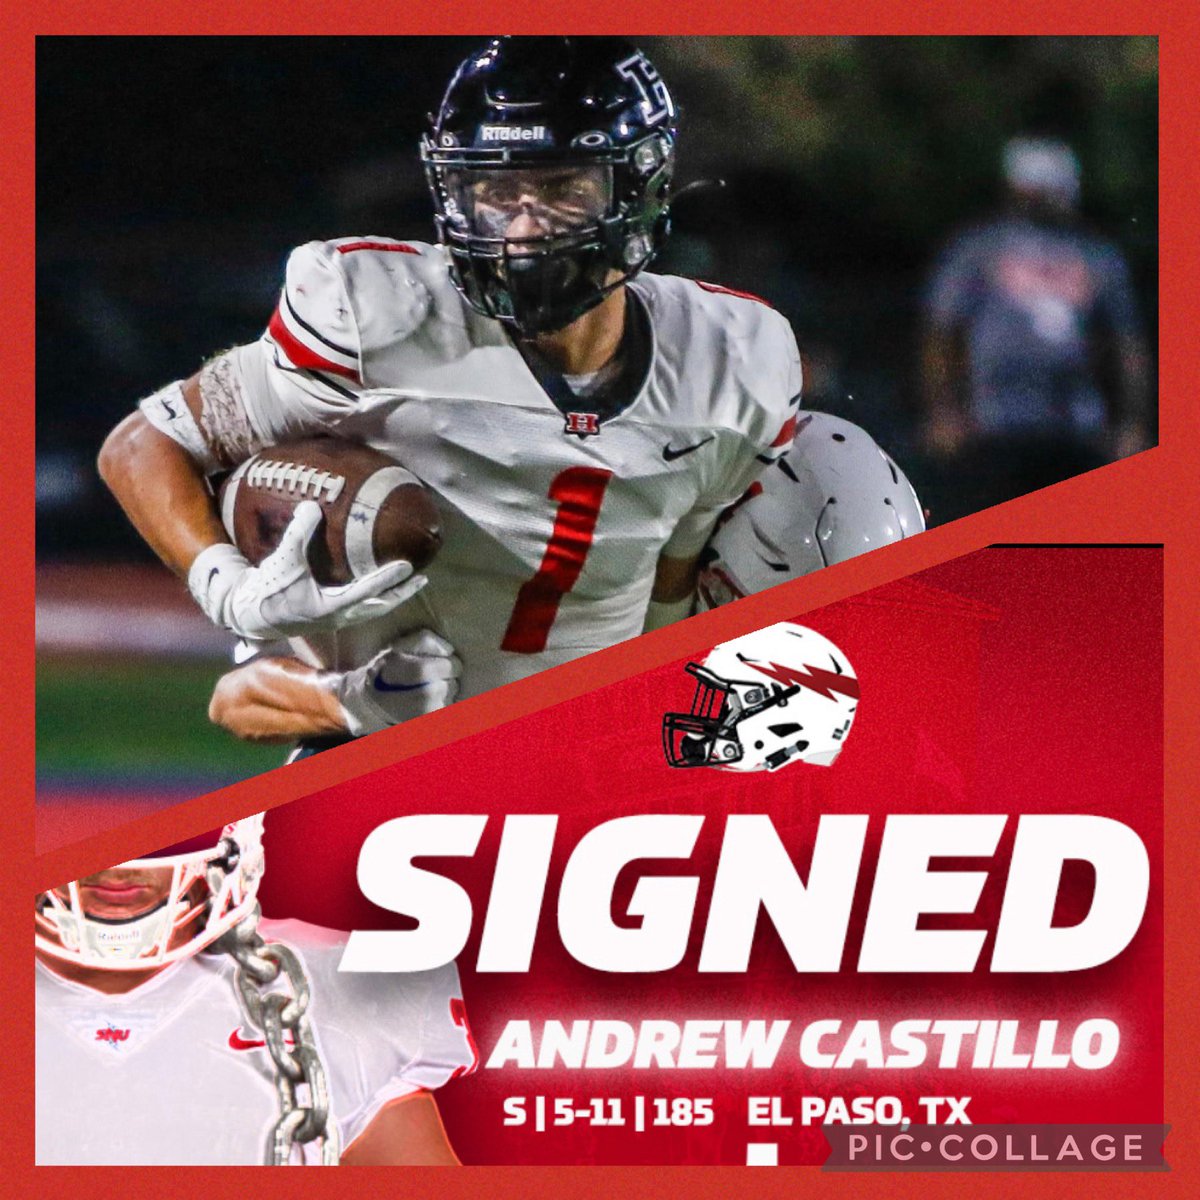 So proud of this young man. @drew2castillo was a true leader for us. @SNUFootball is getting a great one. @CoachHada @Coach_Indy @CoachNABrown @casey_matlock2